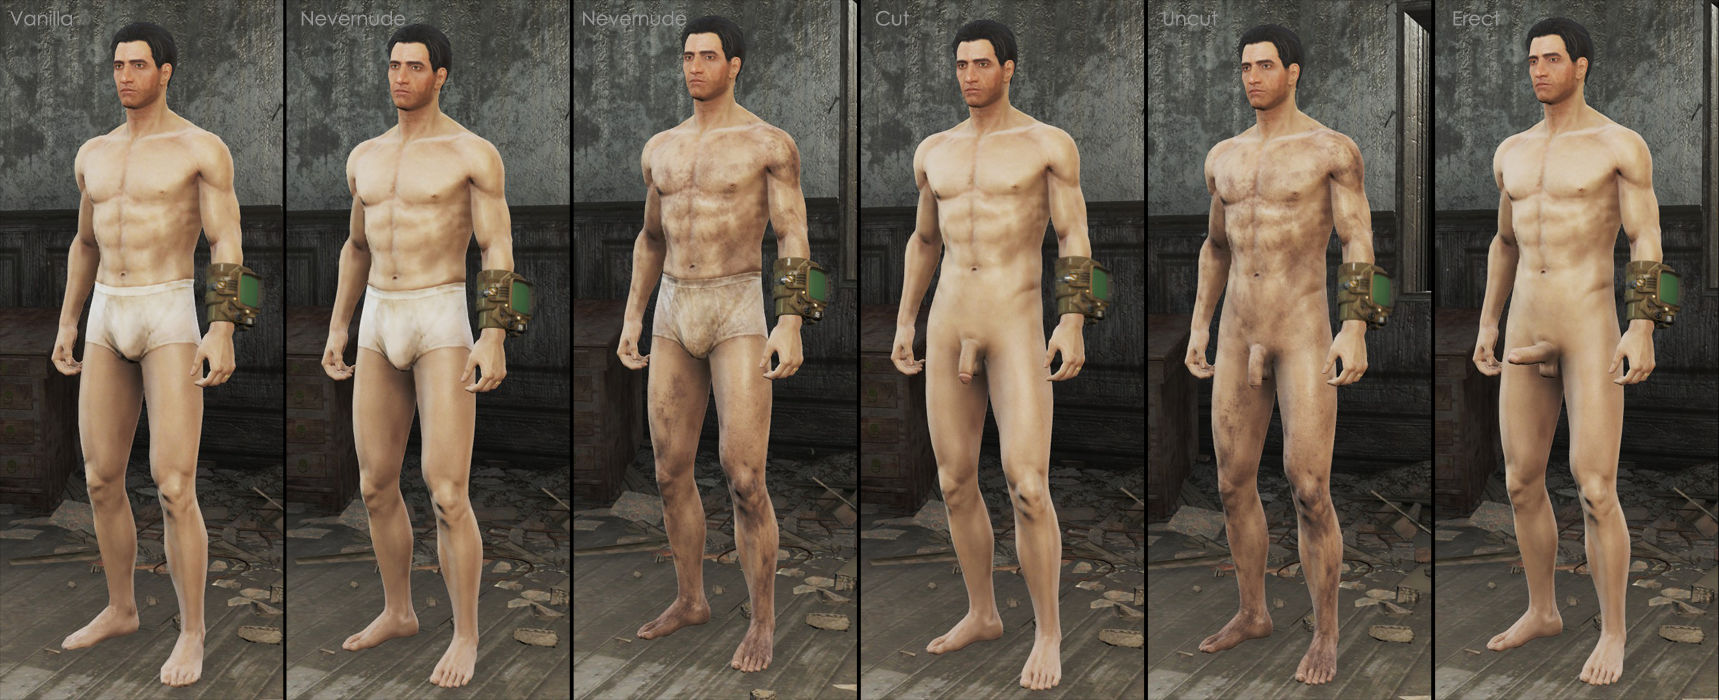 Games with males nudity List.